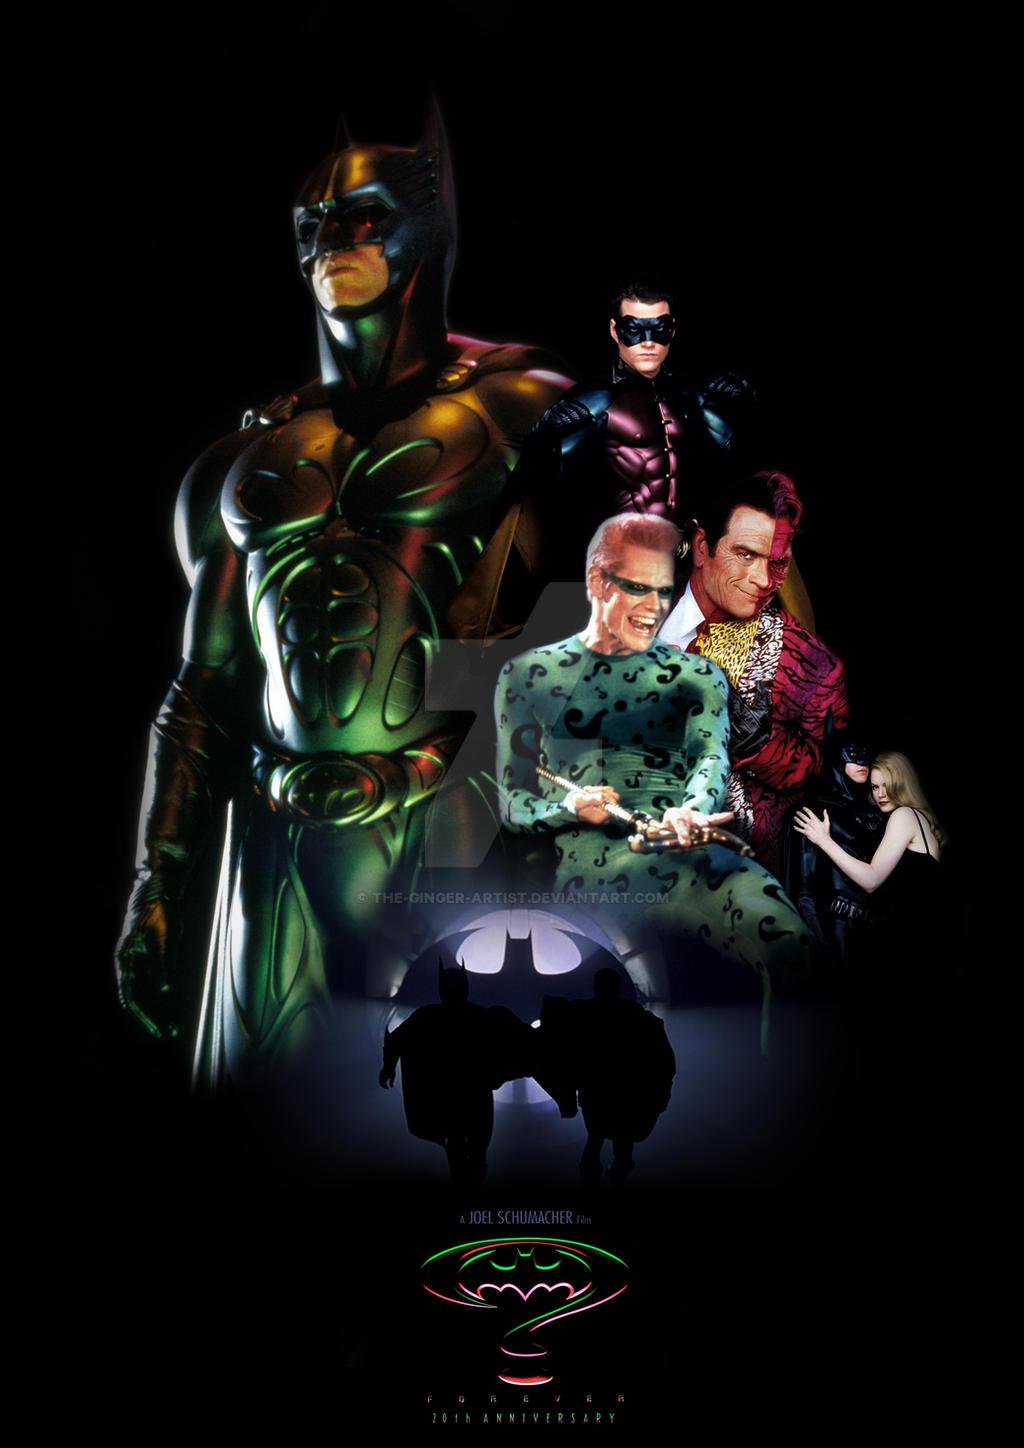 Batman Forever 20th Anniversary Poster by The Ginger Artist on